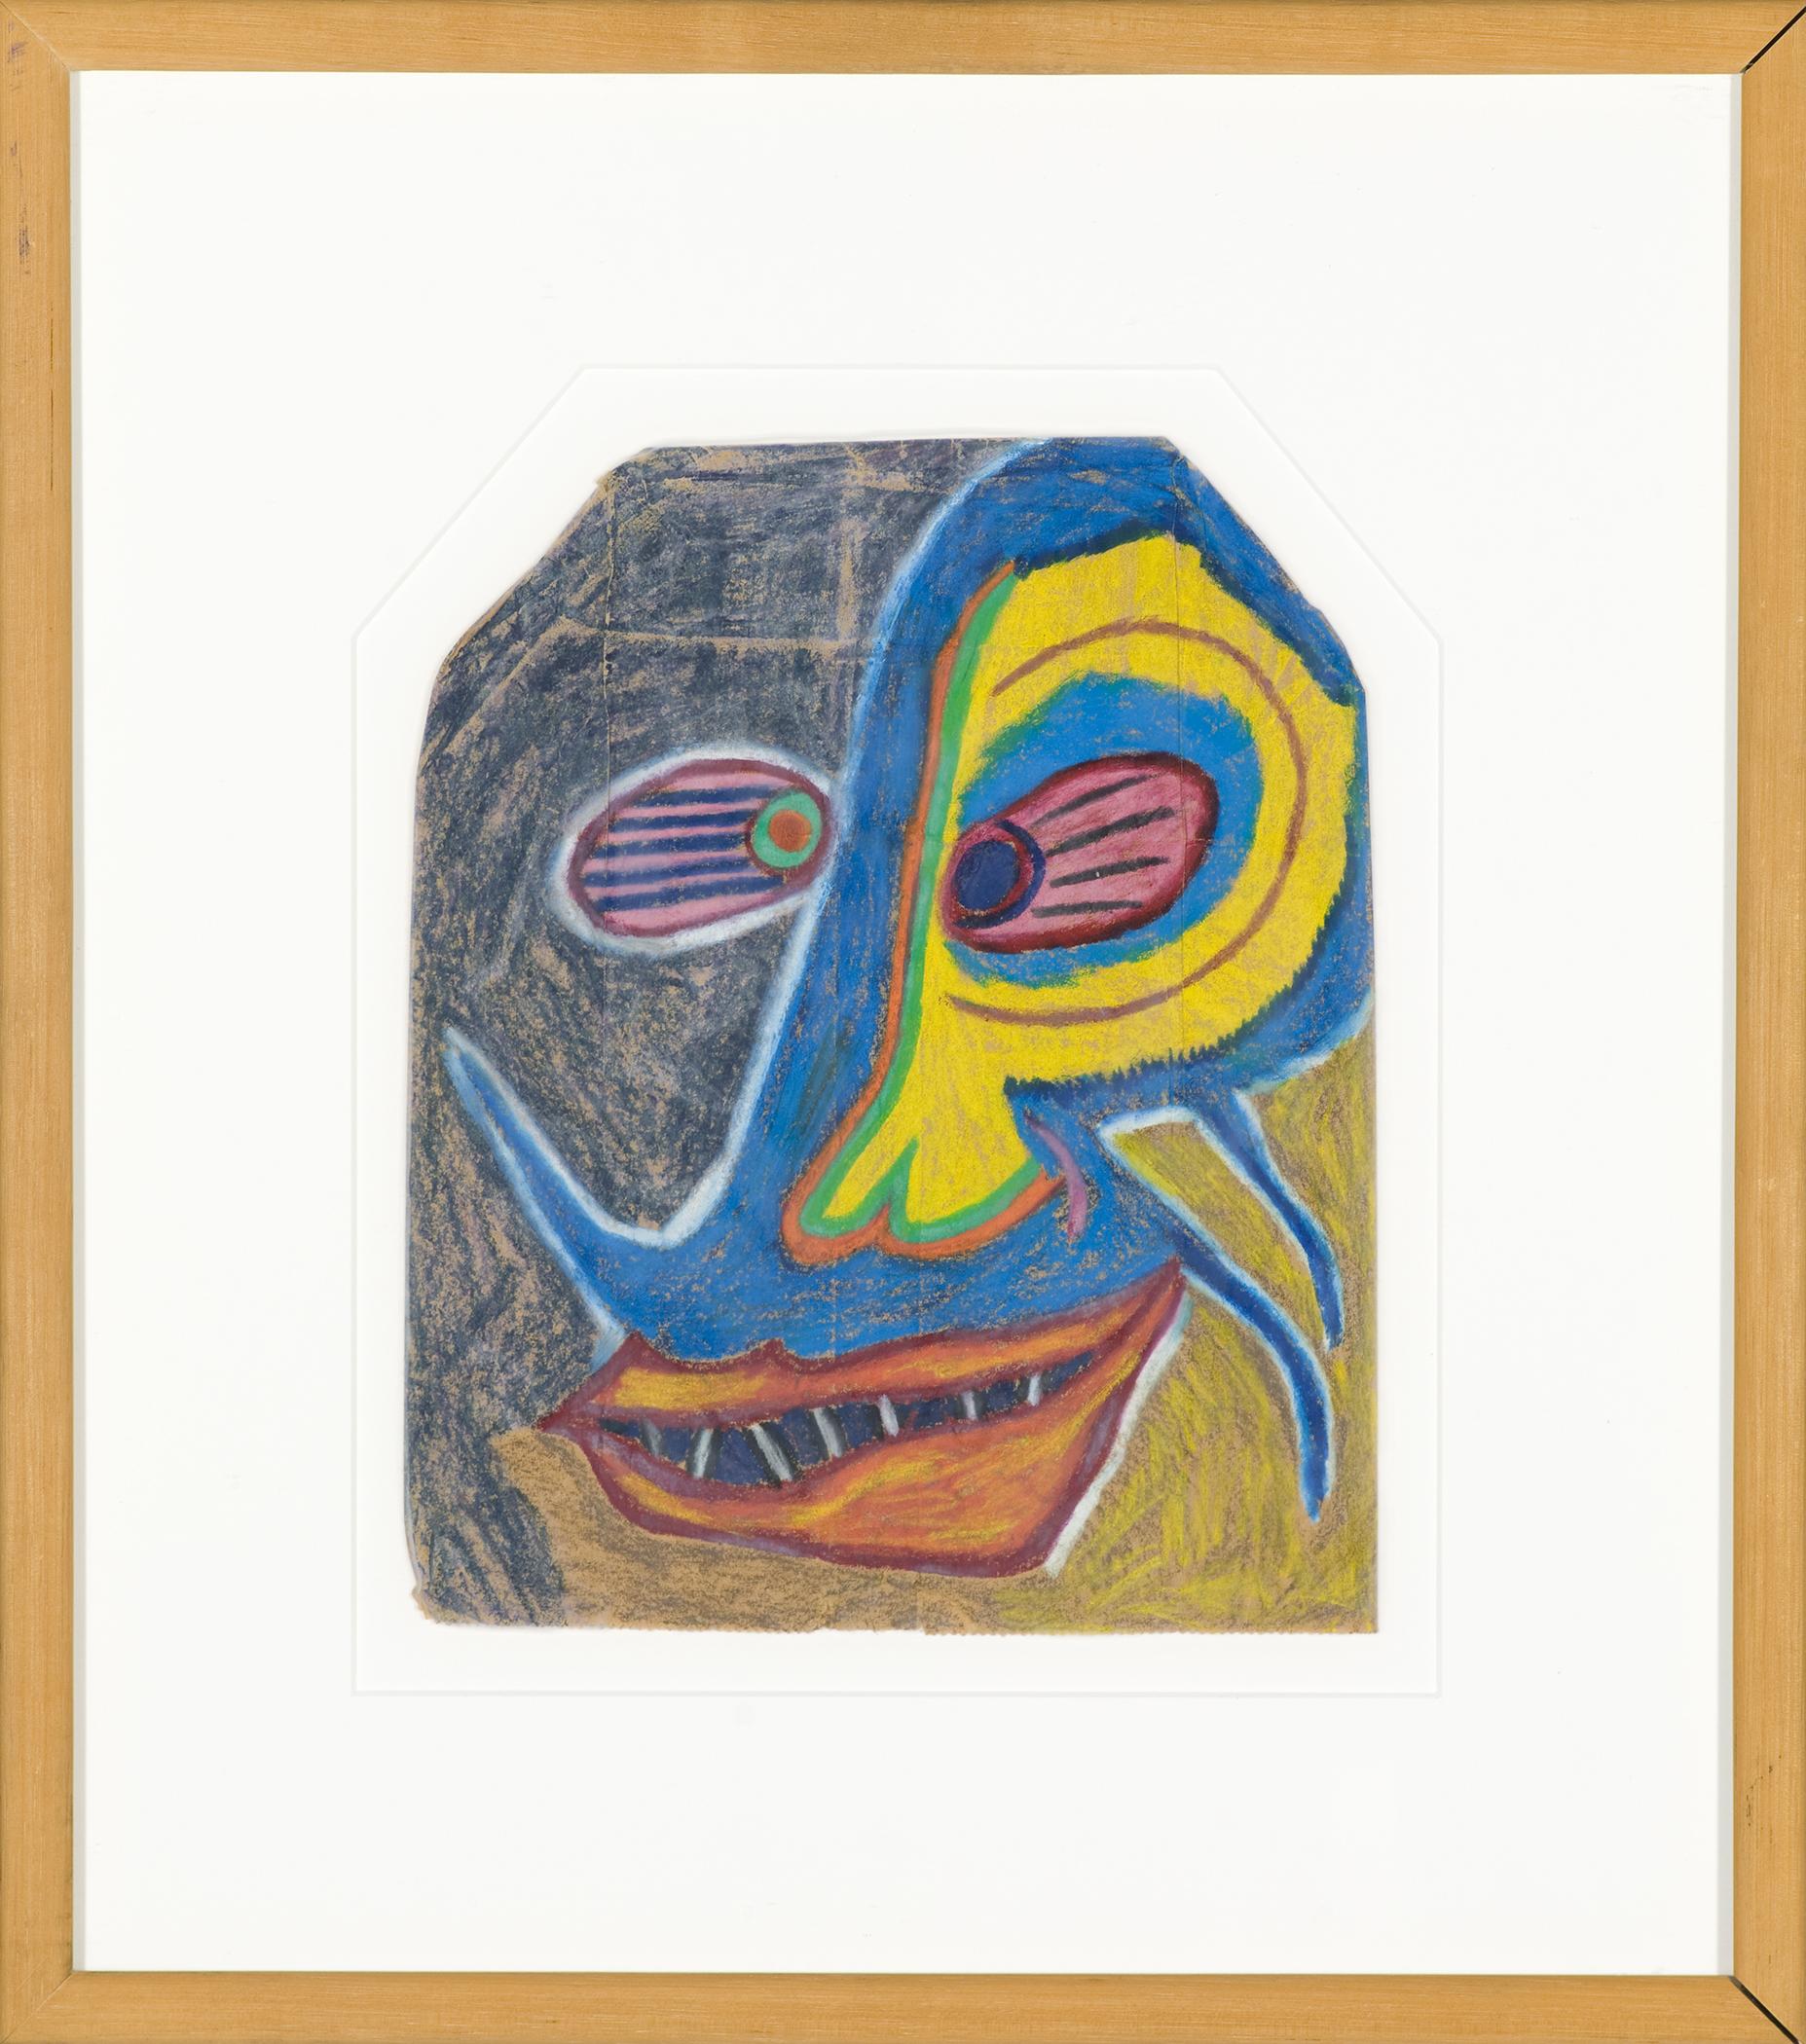 A framed crayon drawing of an abstract human face with striped eyes, lopsided mouth, and pointy teeth